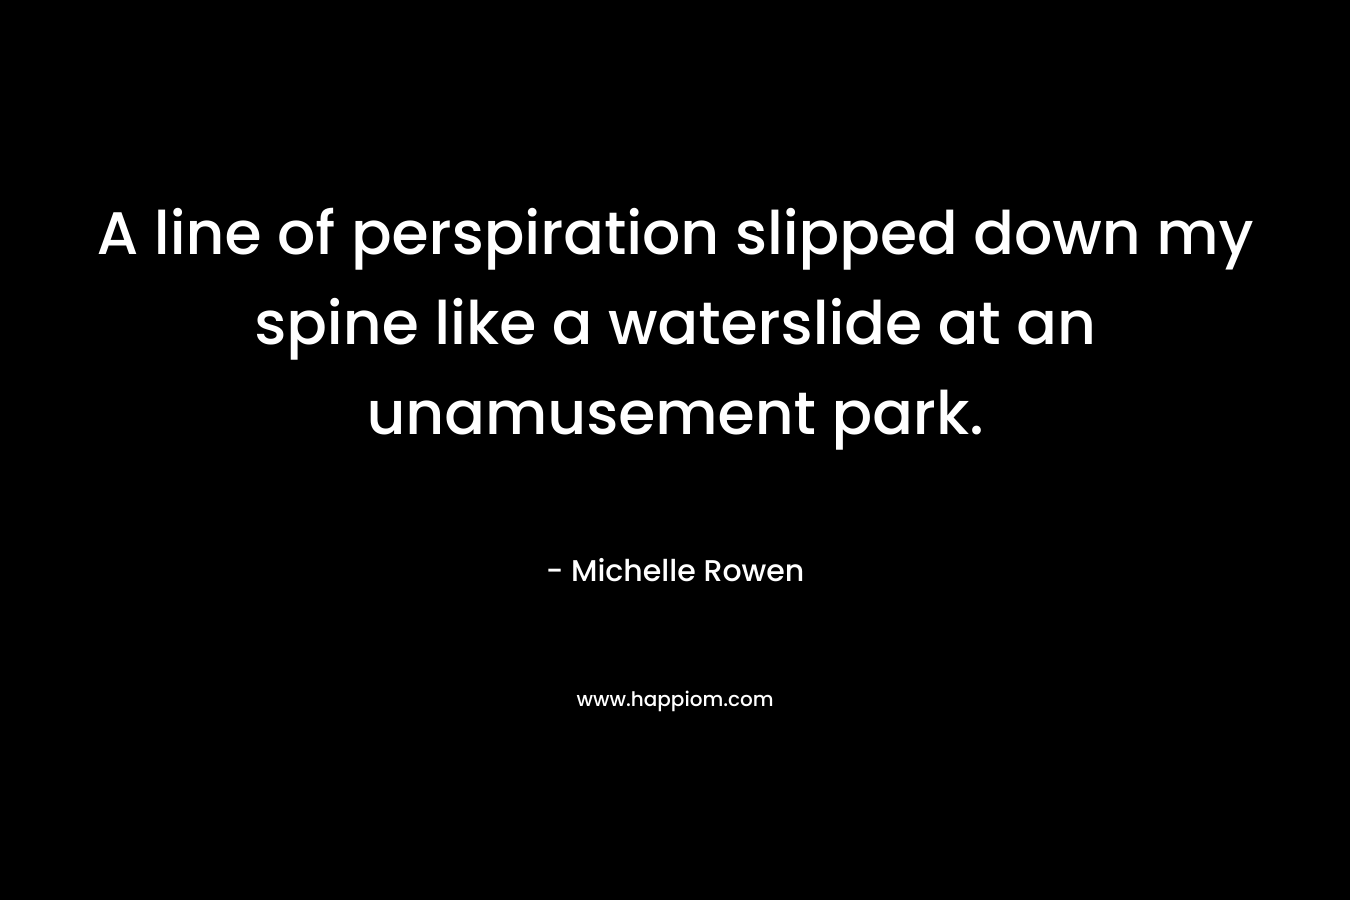 A line of perspiration slipped down my spine like a waterslide at an unamusement park.